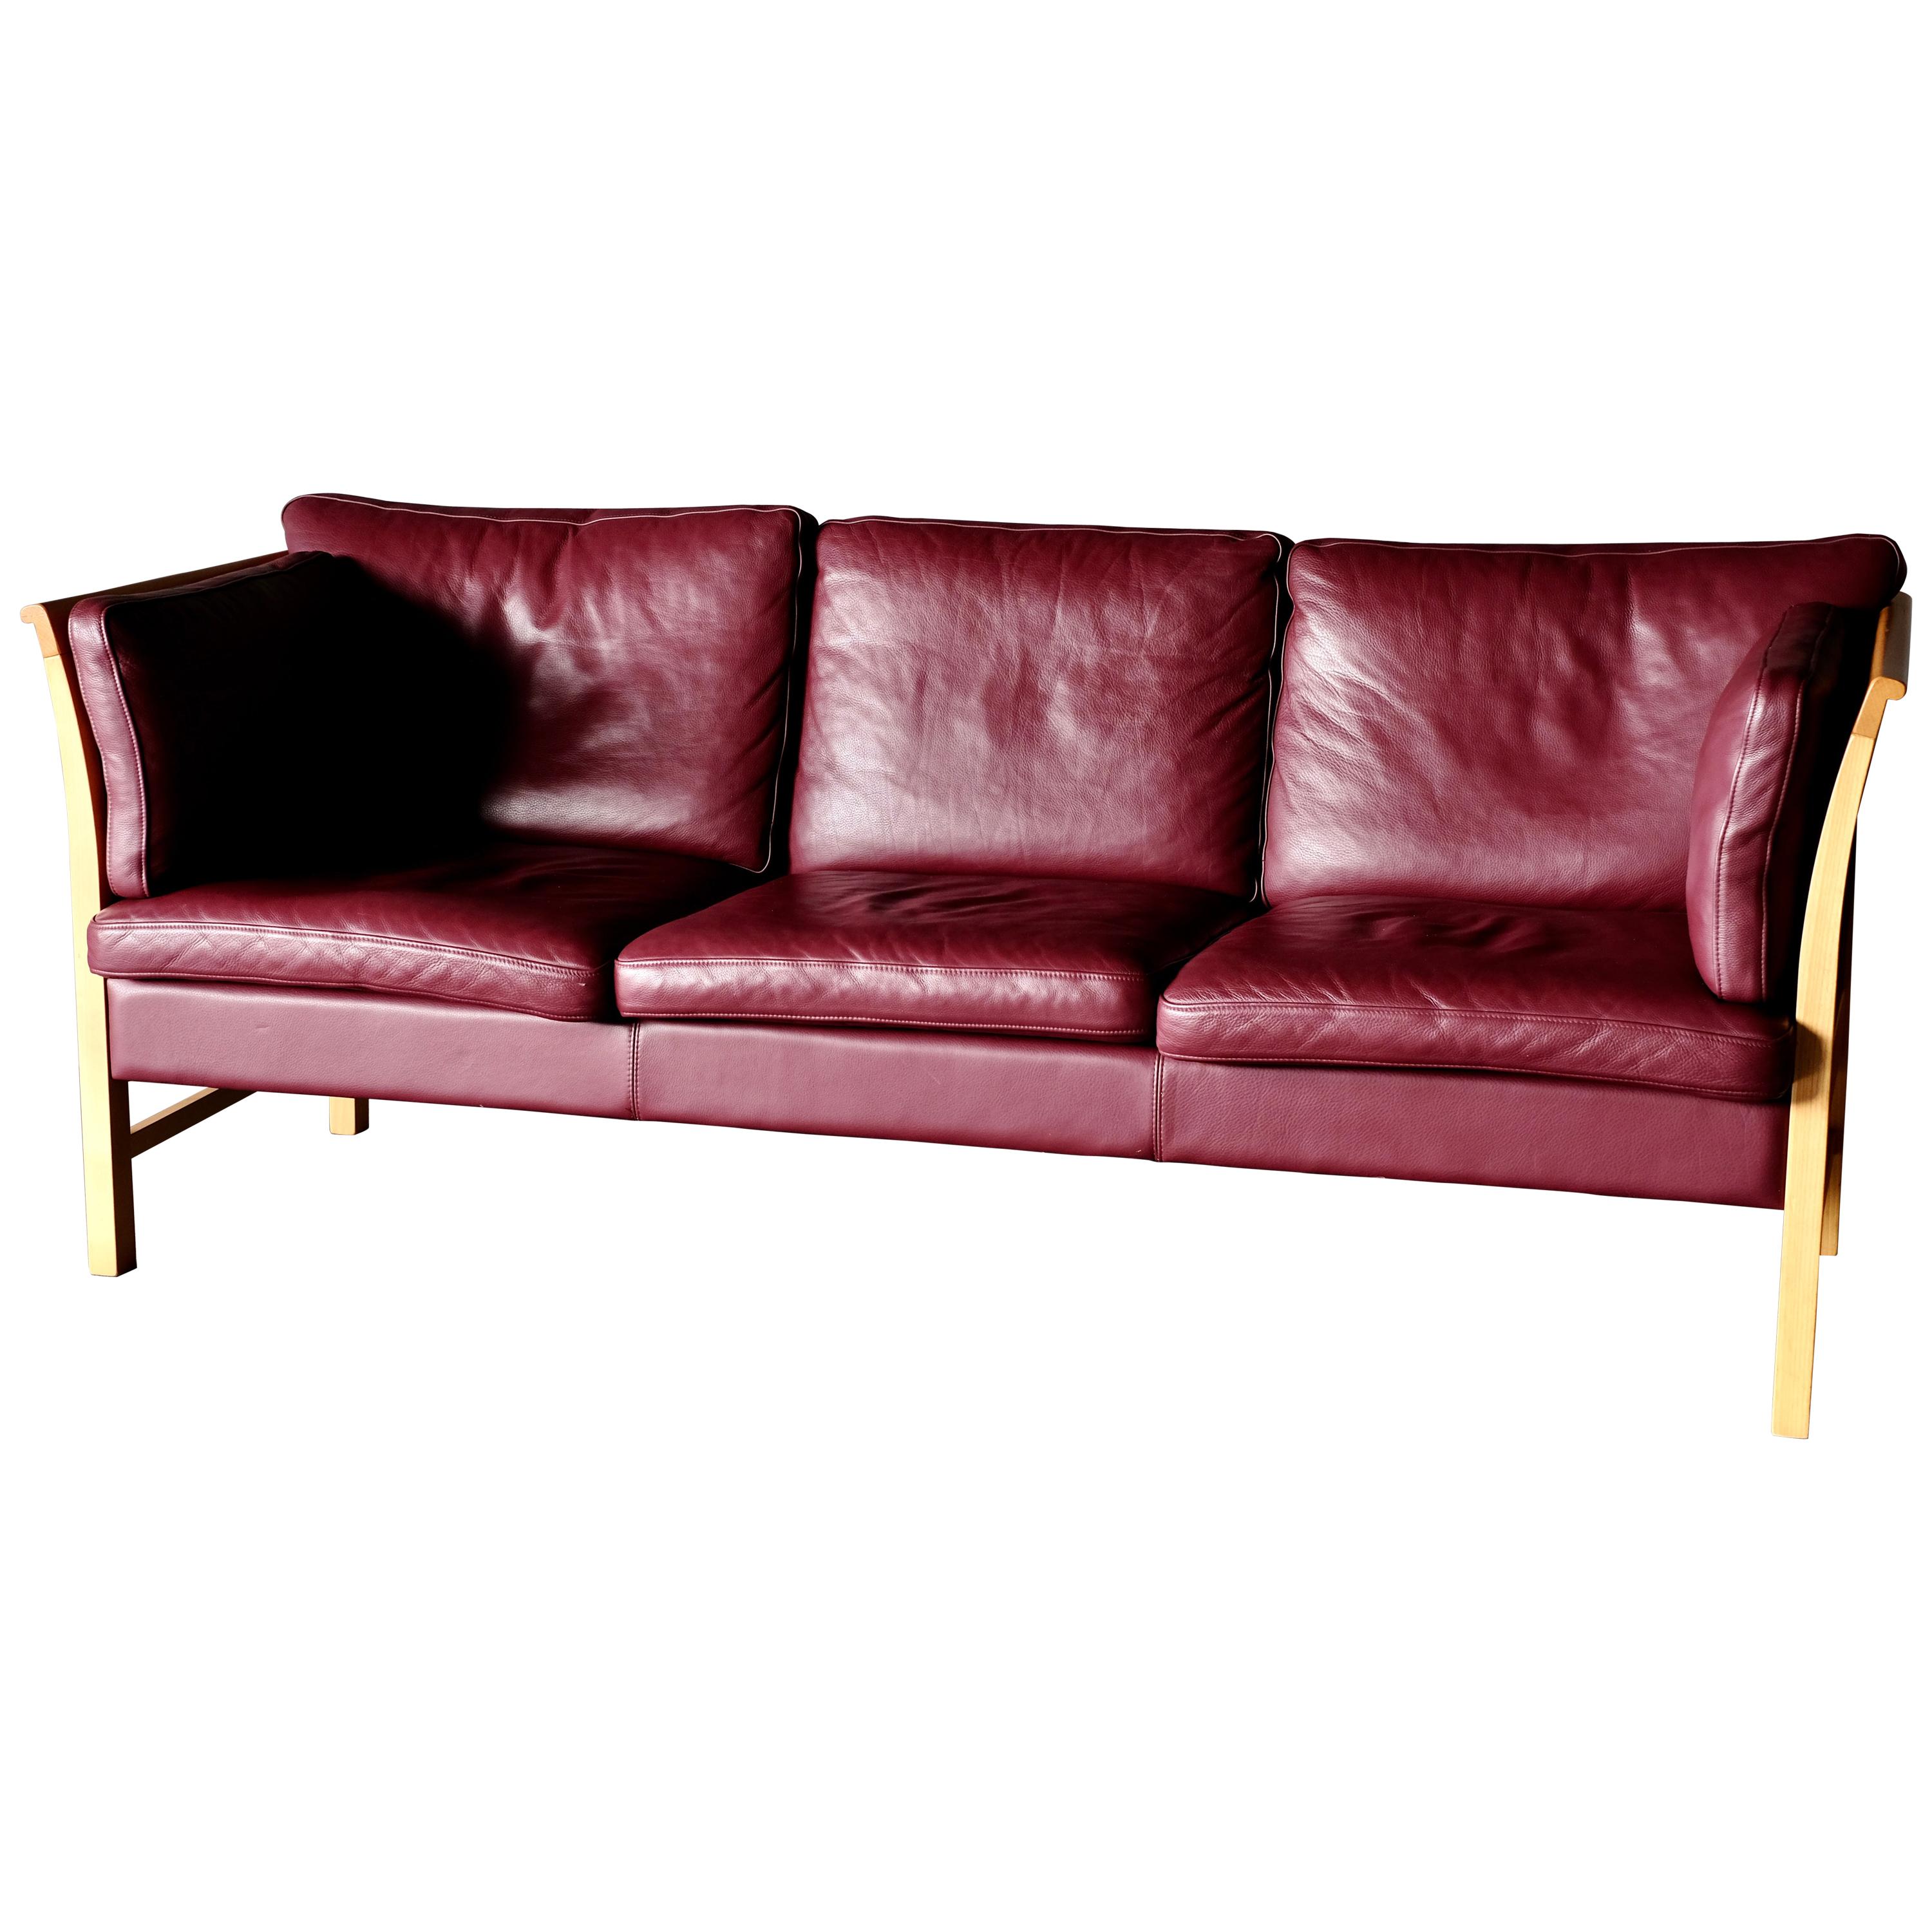 Midcentury Sofa in Burgundy Leather For Sale